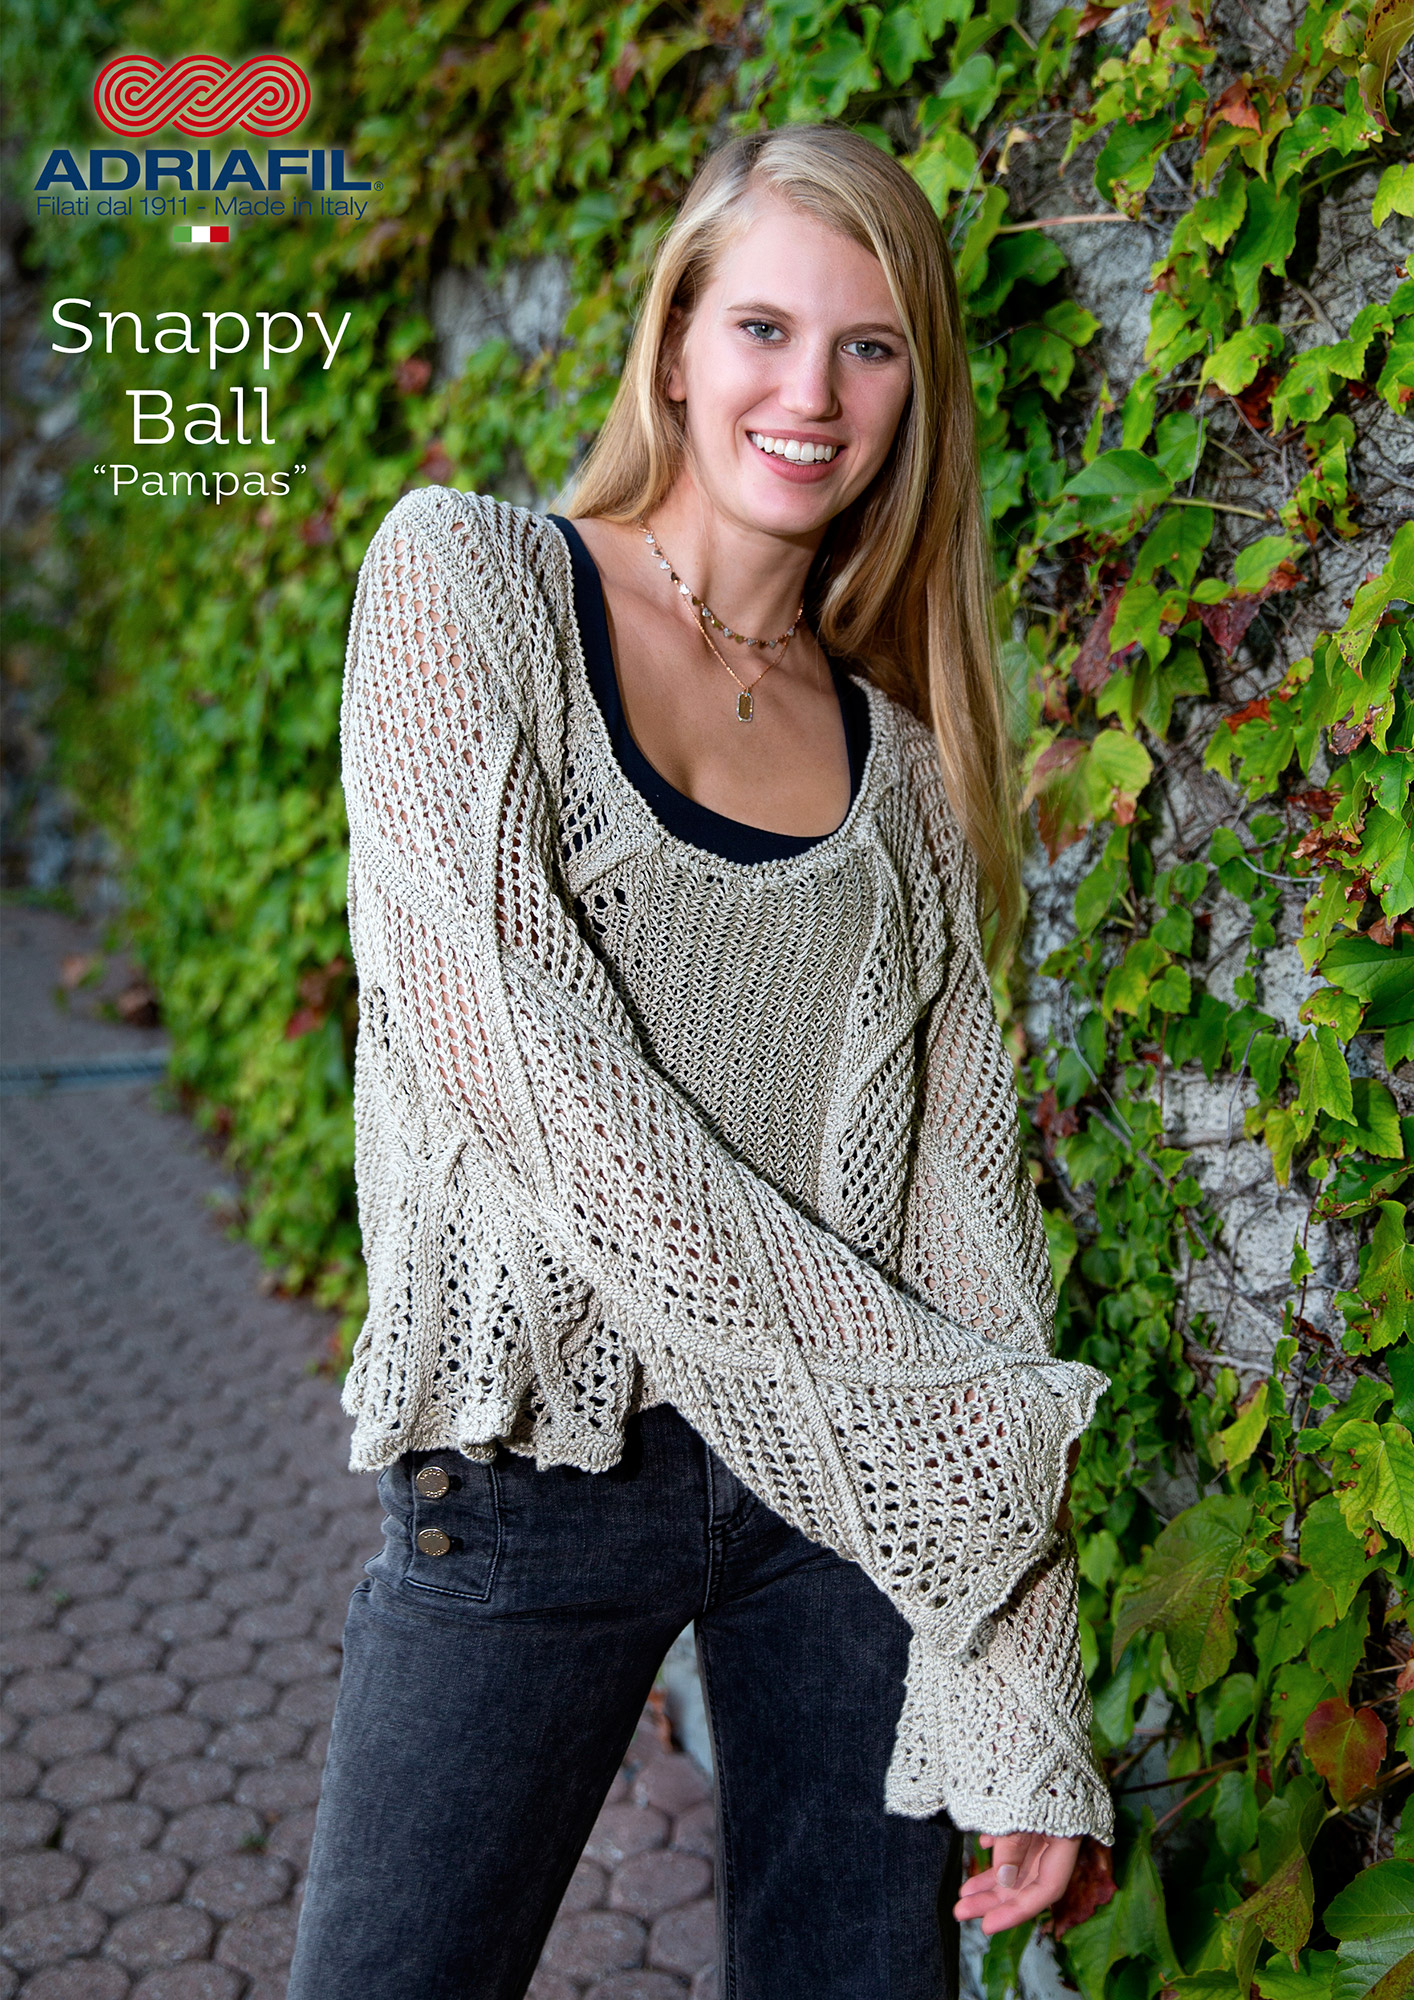 ADRIAFIL SNAPPY BALL PULLOVER PAMPAS